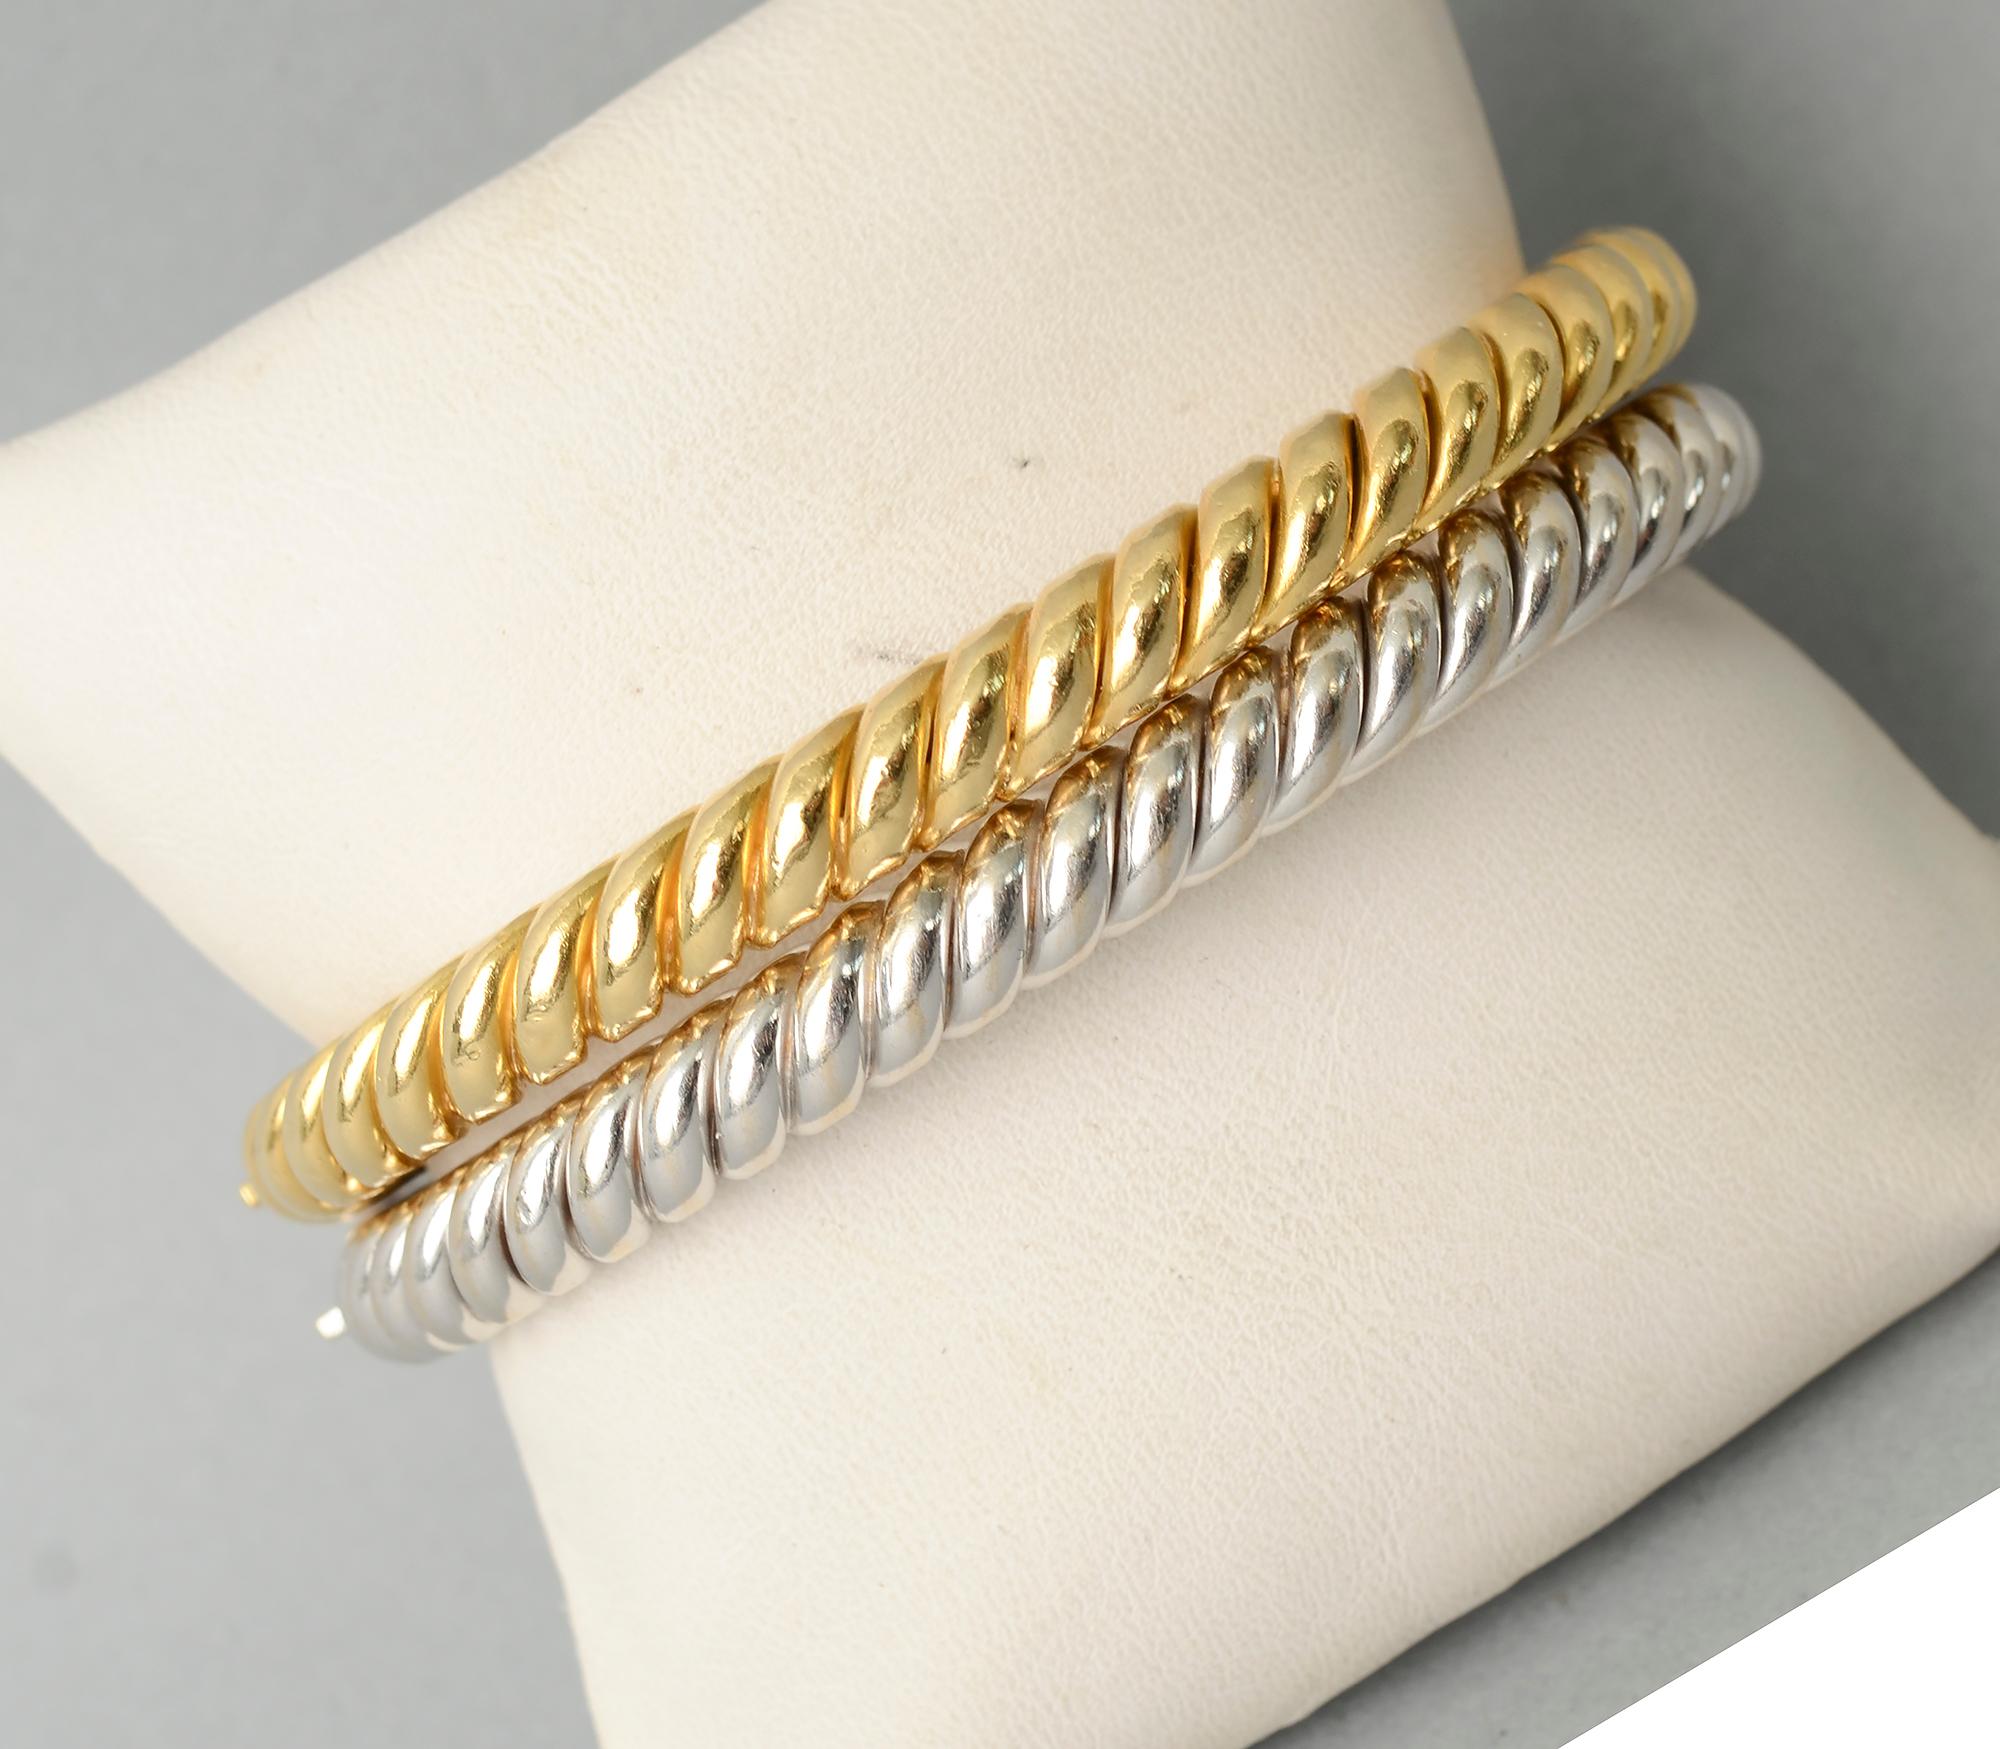 This is a classic pair of twisted gold bangle bracelets by Van Cleef and Arpels. What sets them apart is that one is yellow gold and one is white gold. They make a statement worn either singly or as a pair.
The inside diameter is 2 1/2 inches. The